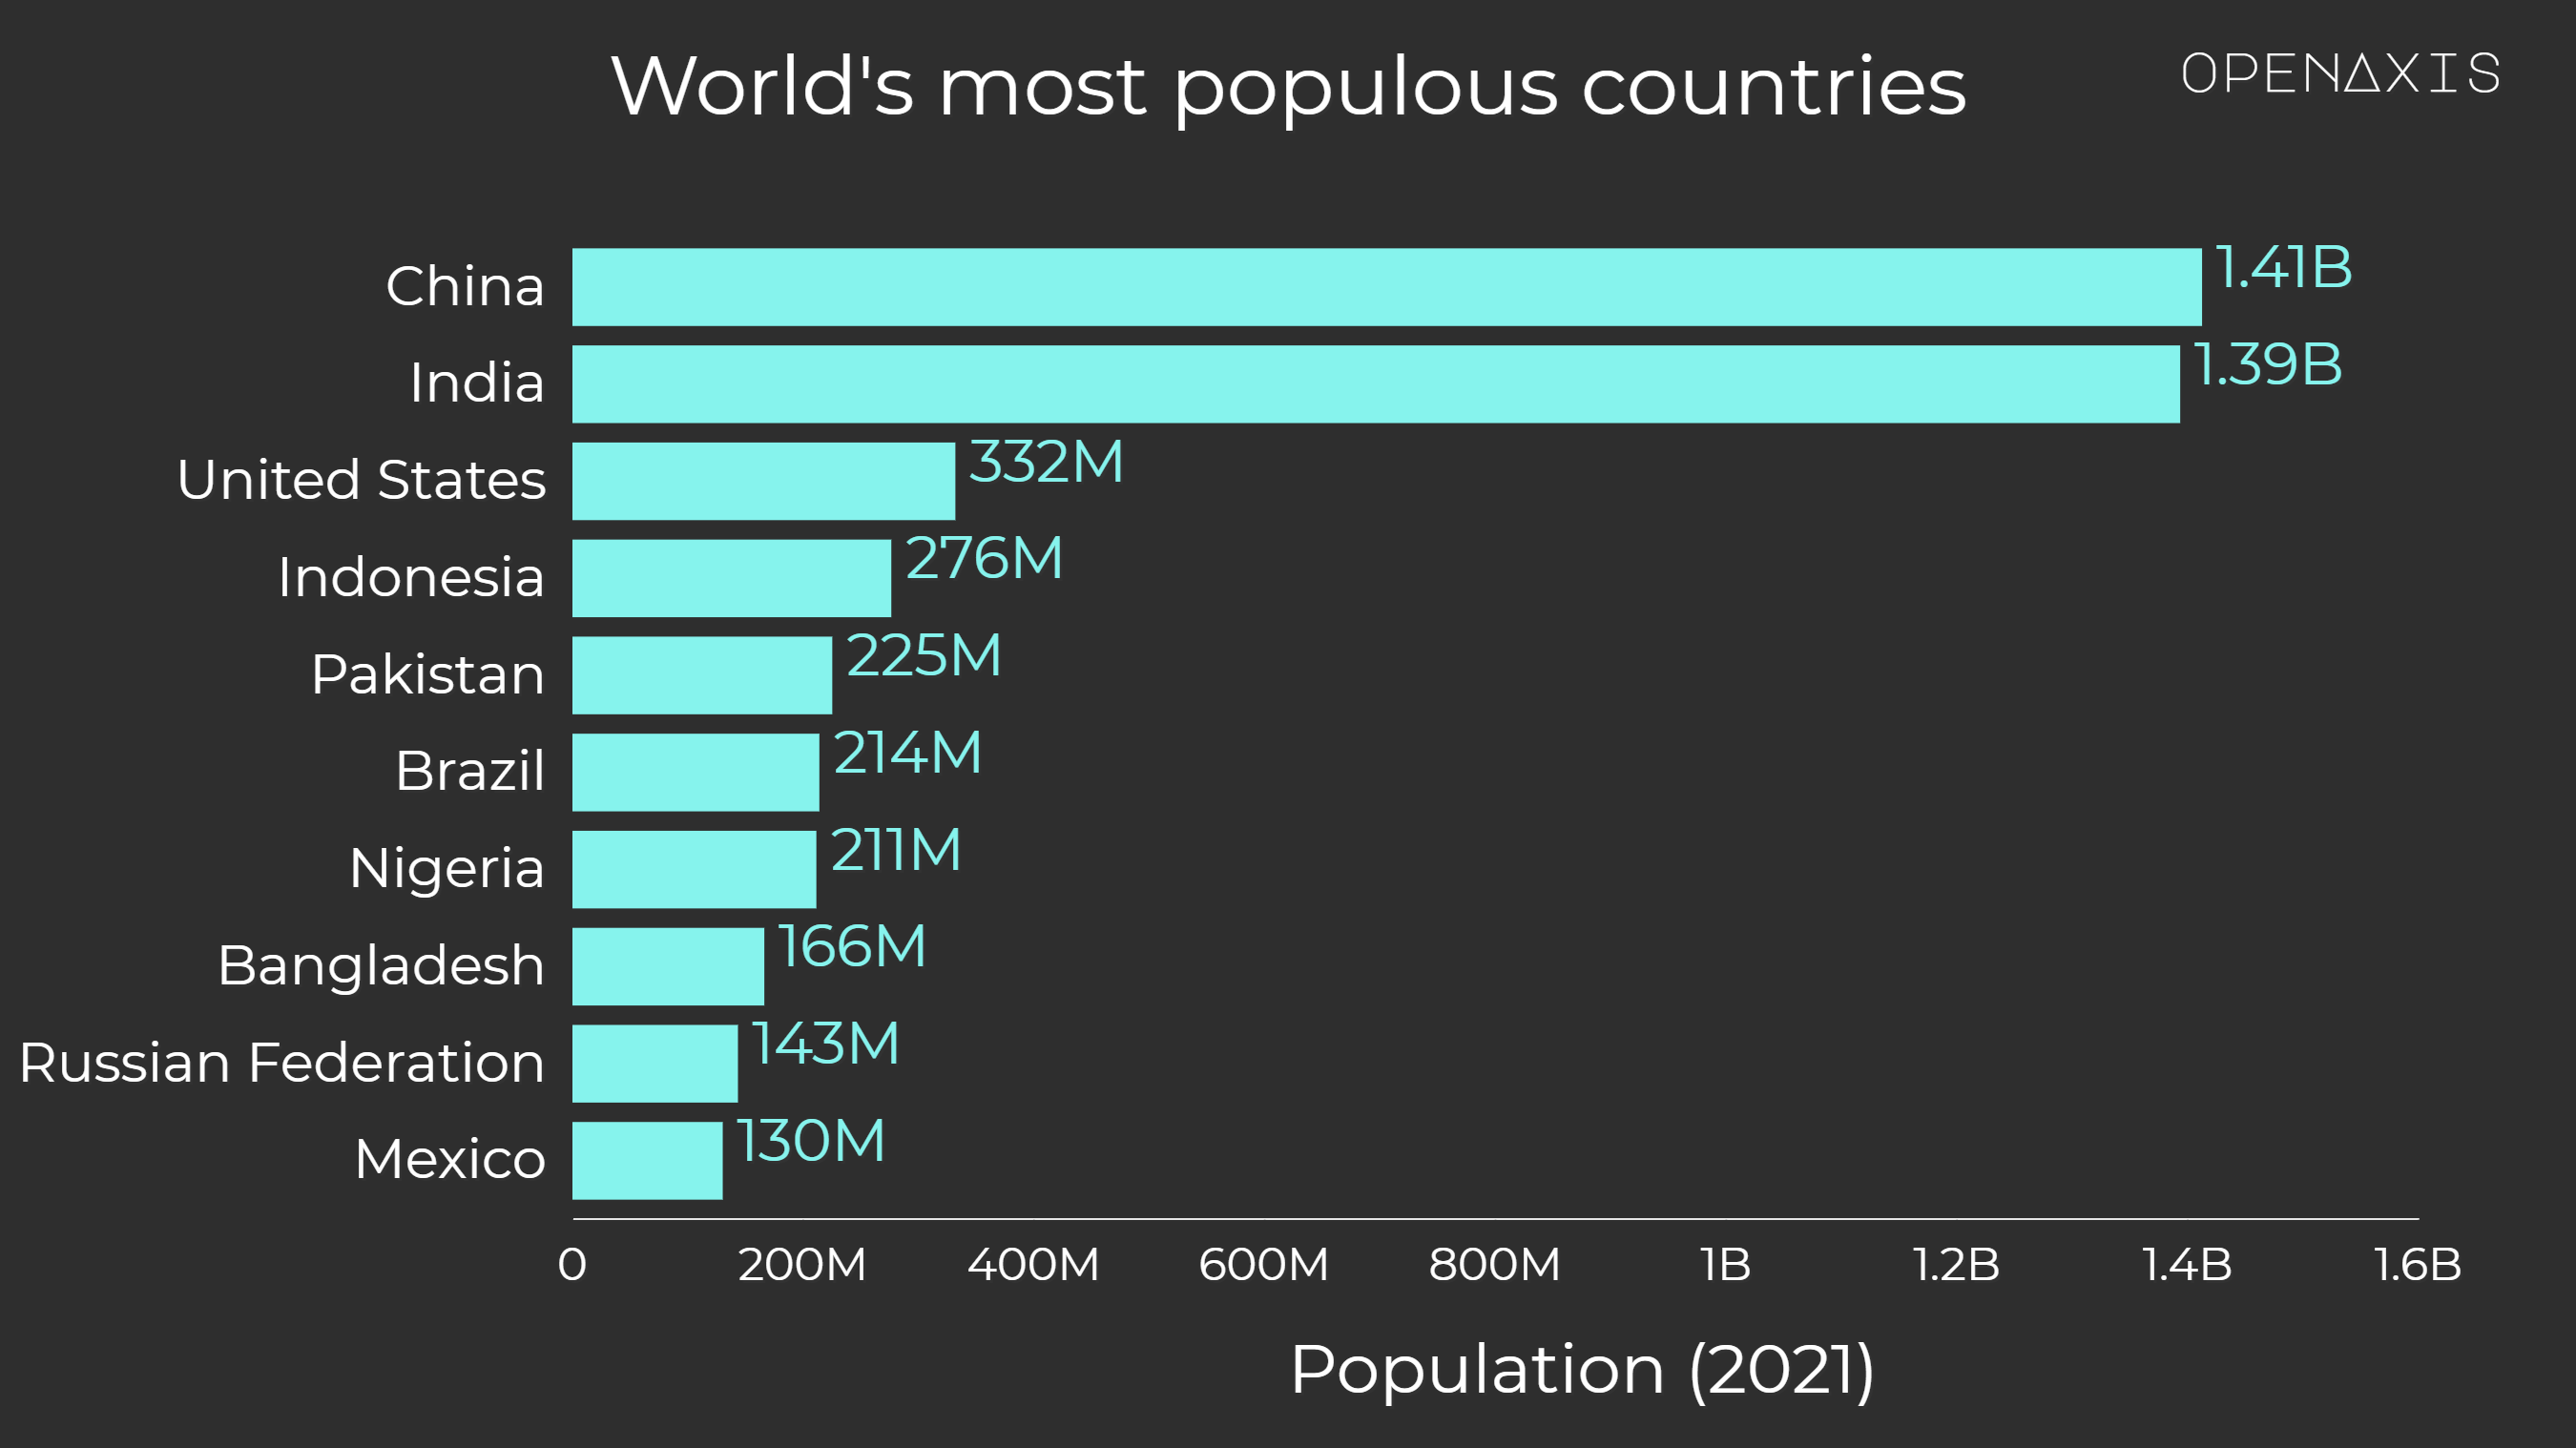 "World's most populous countries"